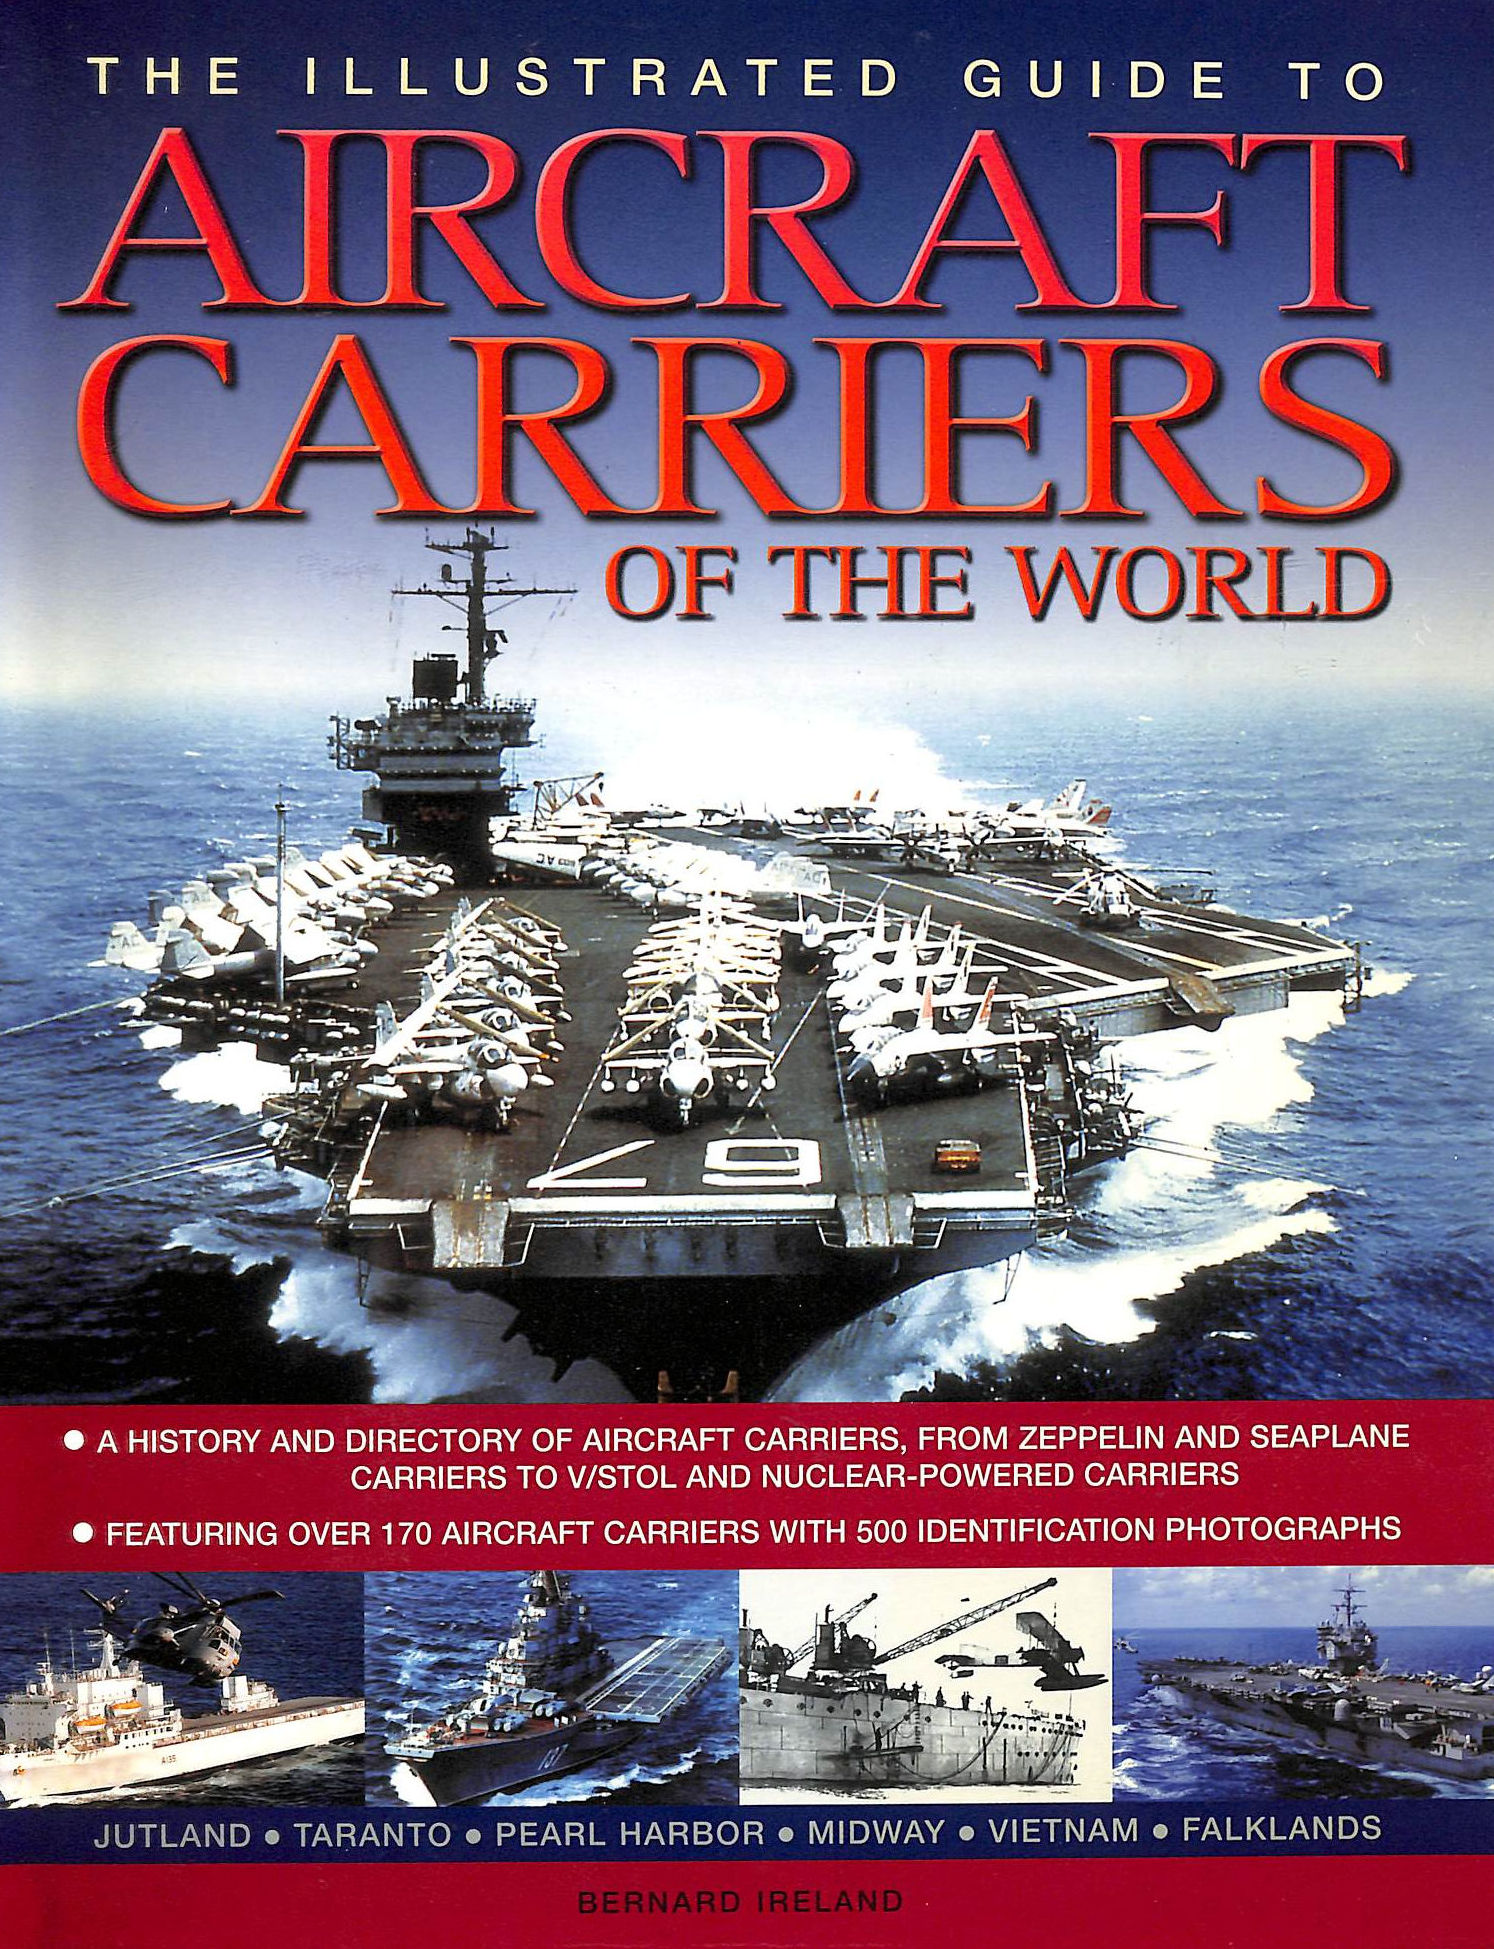 BERNARD IRELAND - The Illustrated Guide To Aircraft Carriers Of The World